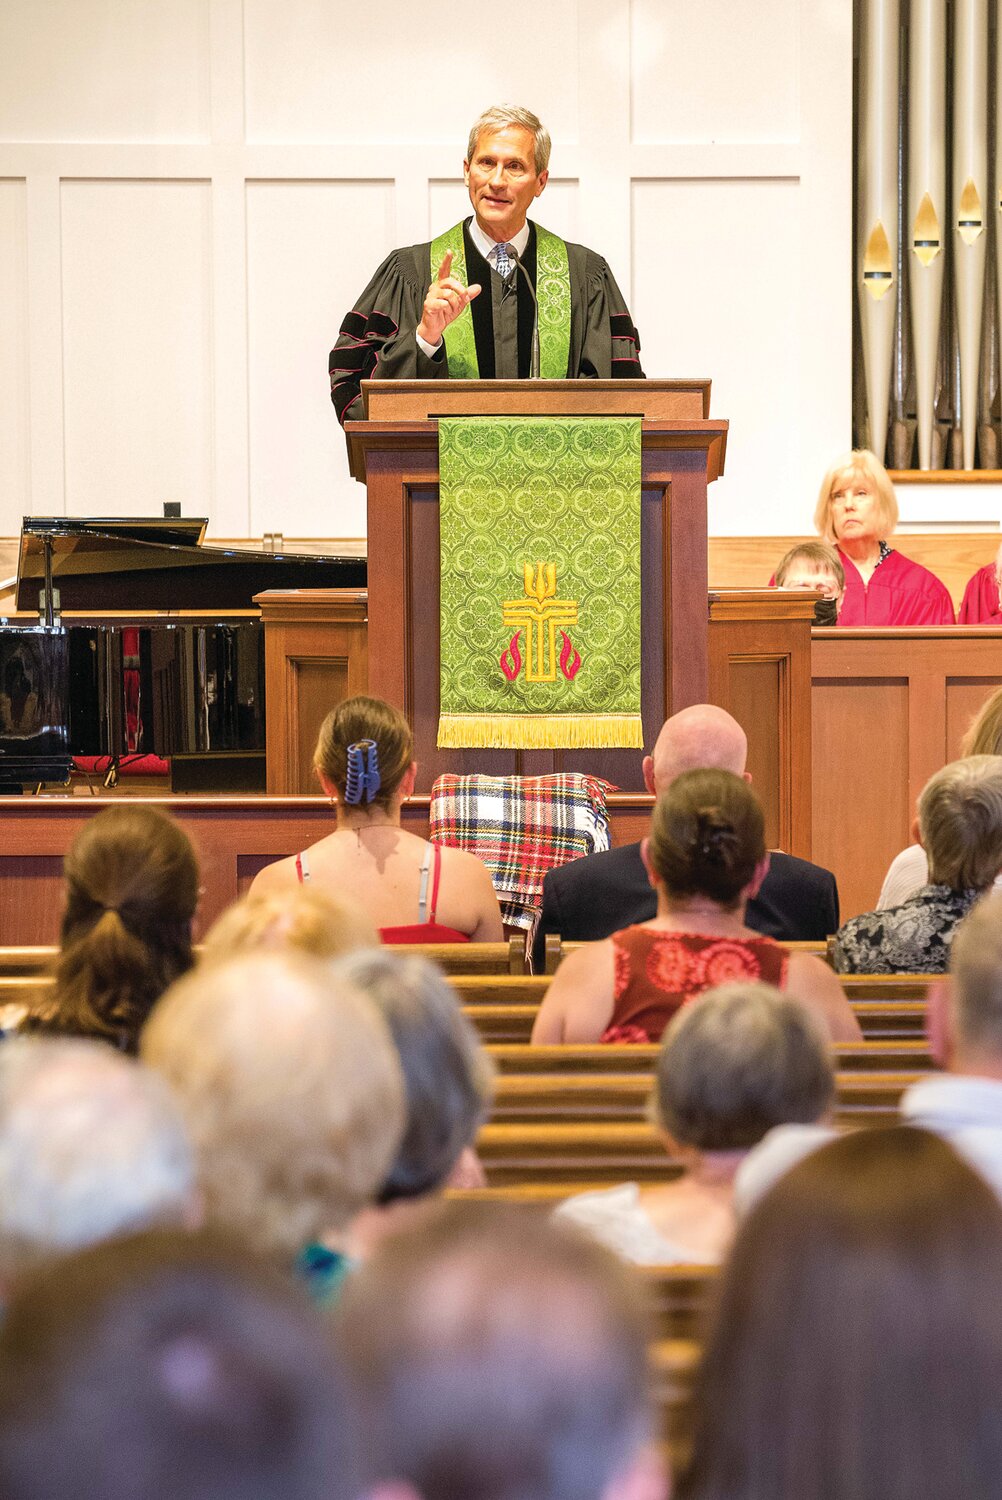 The Rev. John Willingham plans to retire. He will give his last sermon at Doylestown Presbyterian Church later this month.